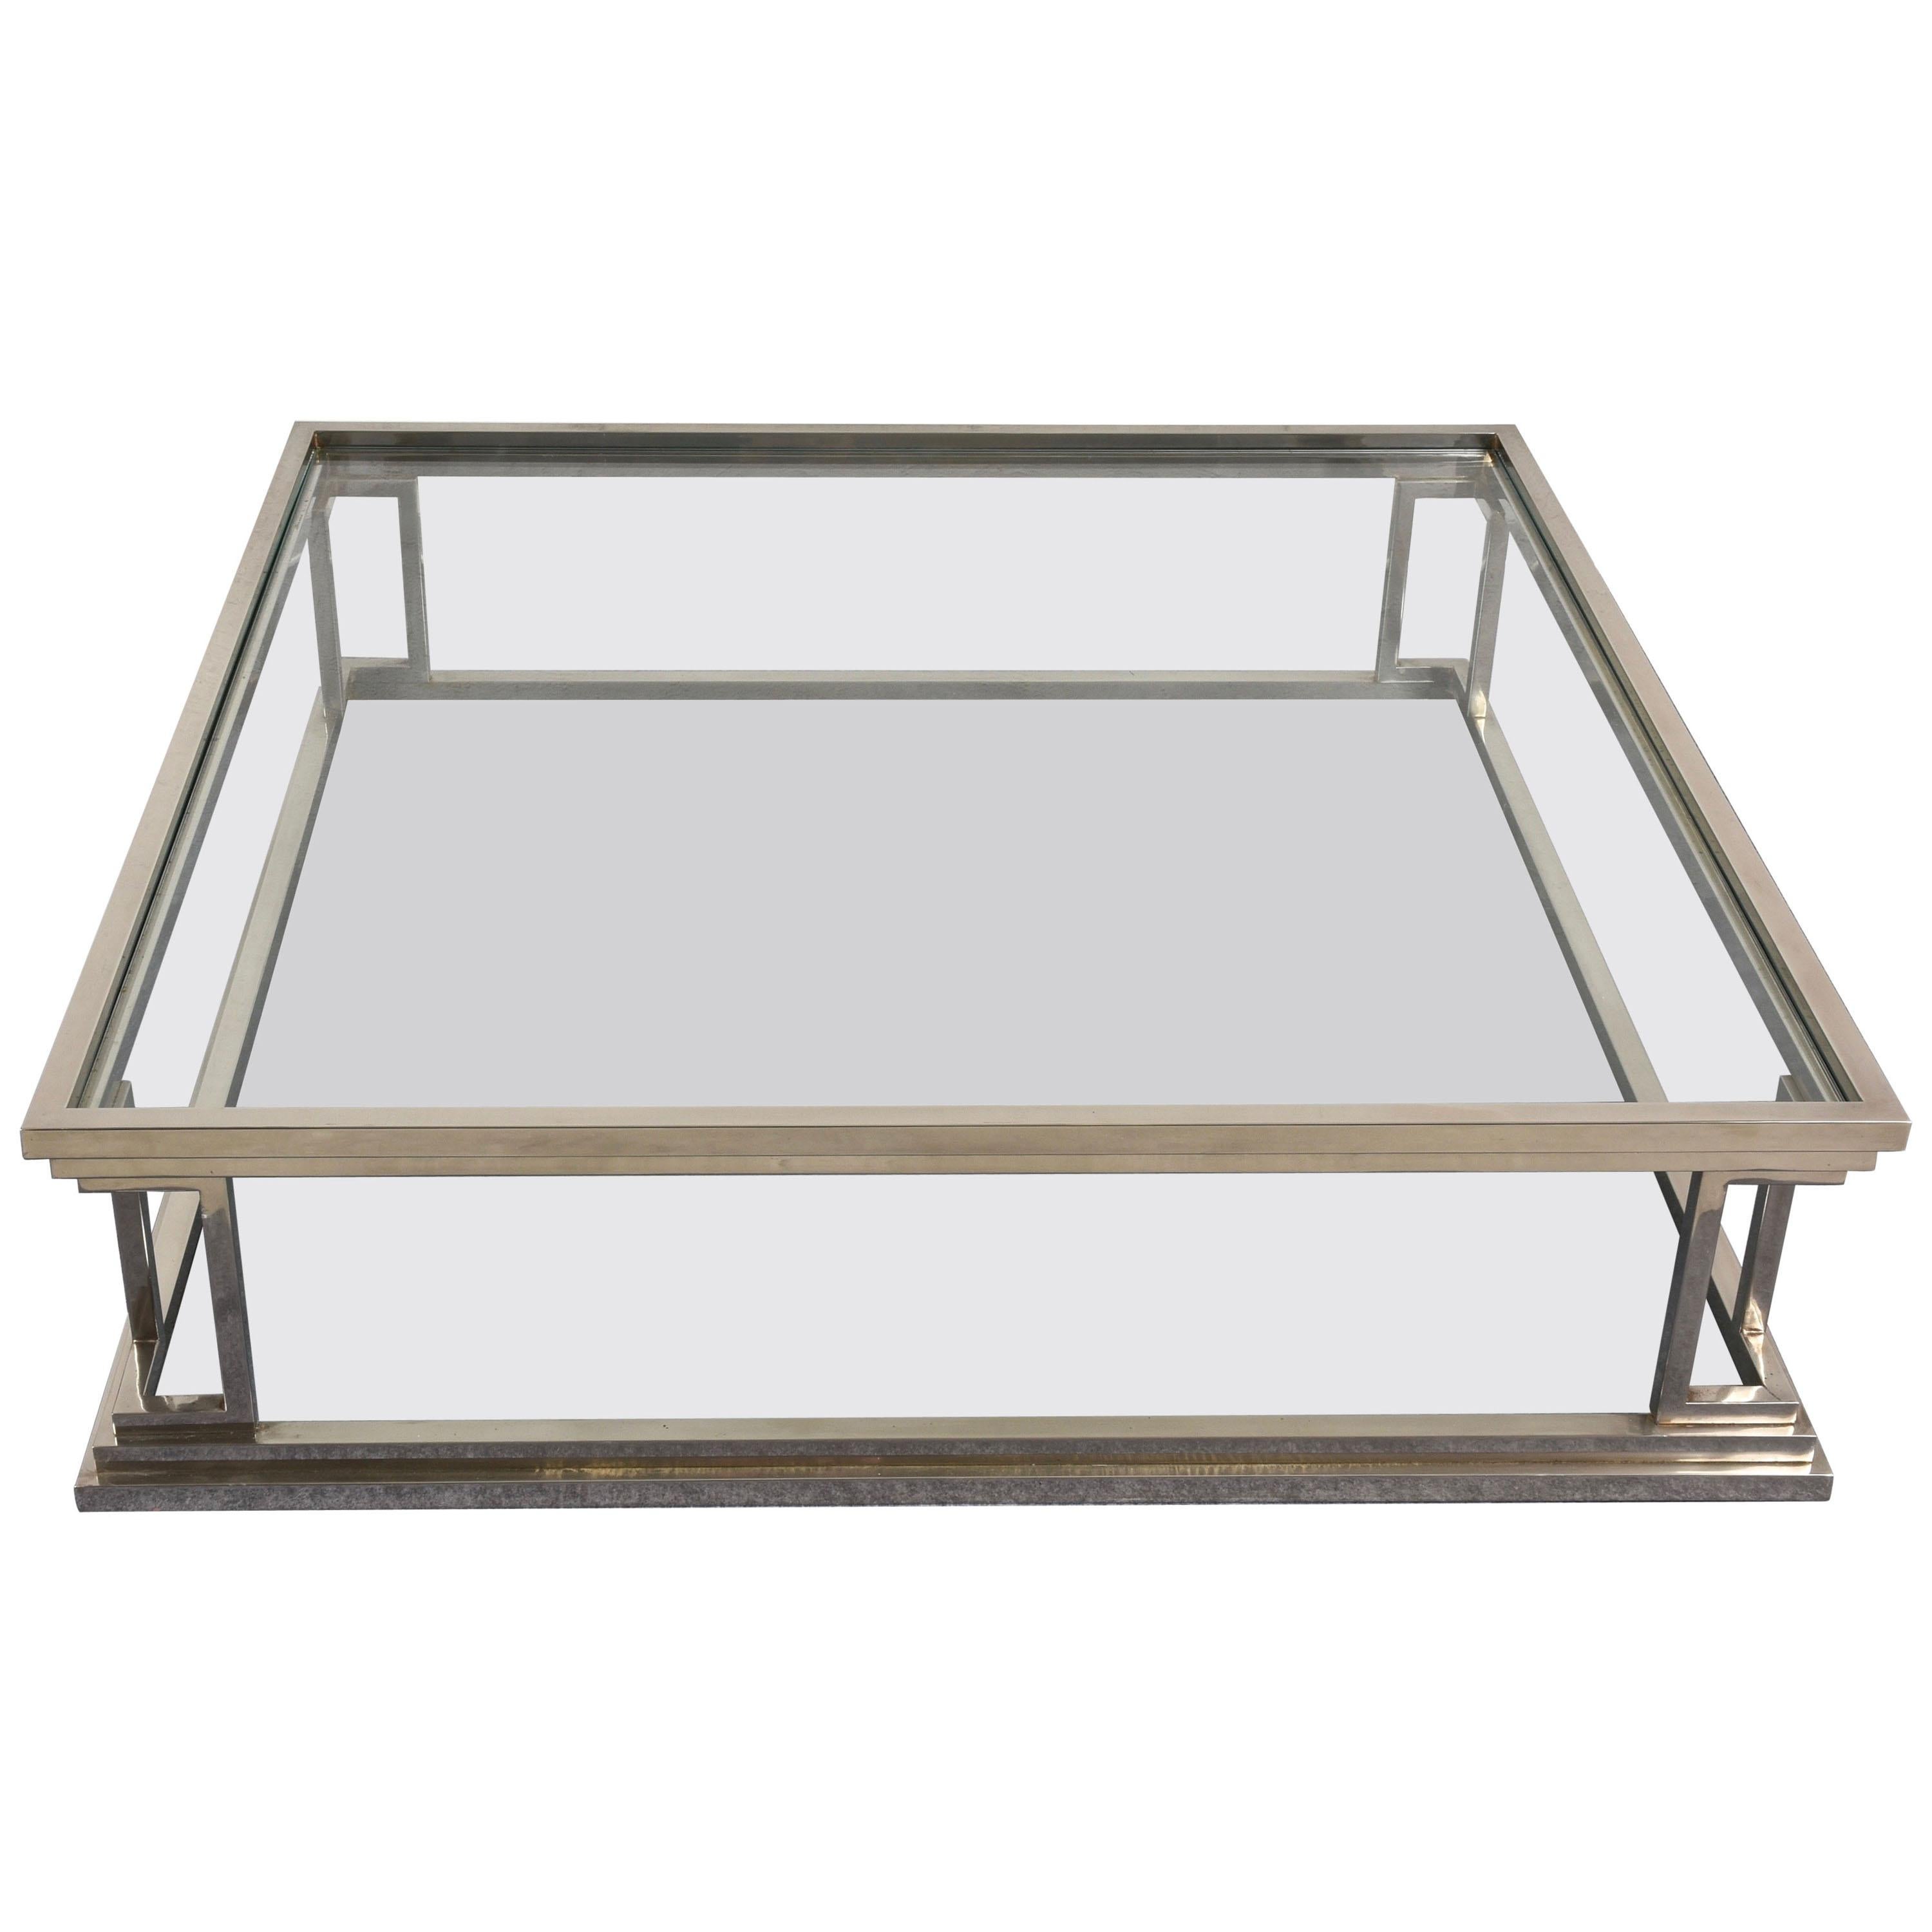 Square Stainless Steel Coffee Table with 2 Levels in Glass, Rega, Italy 1970s